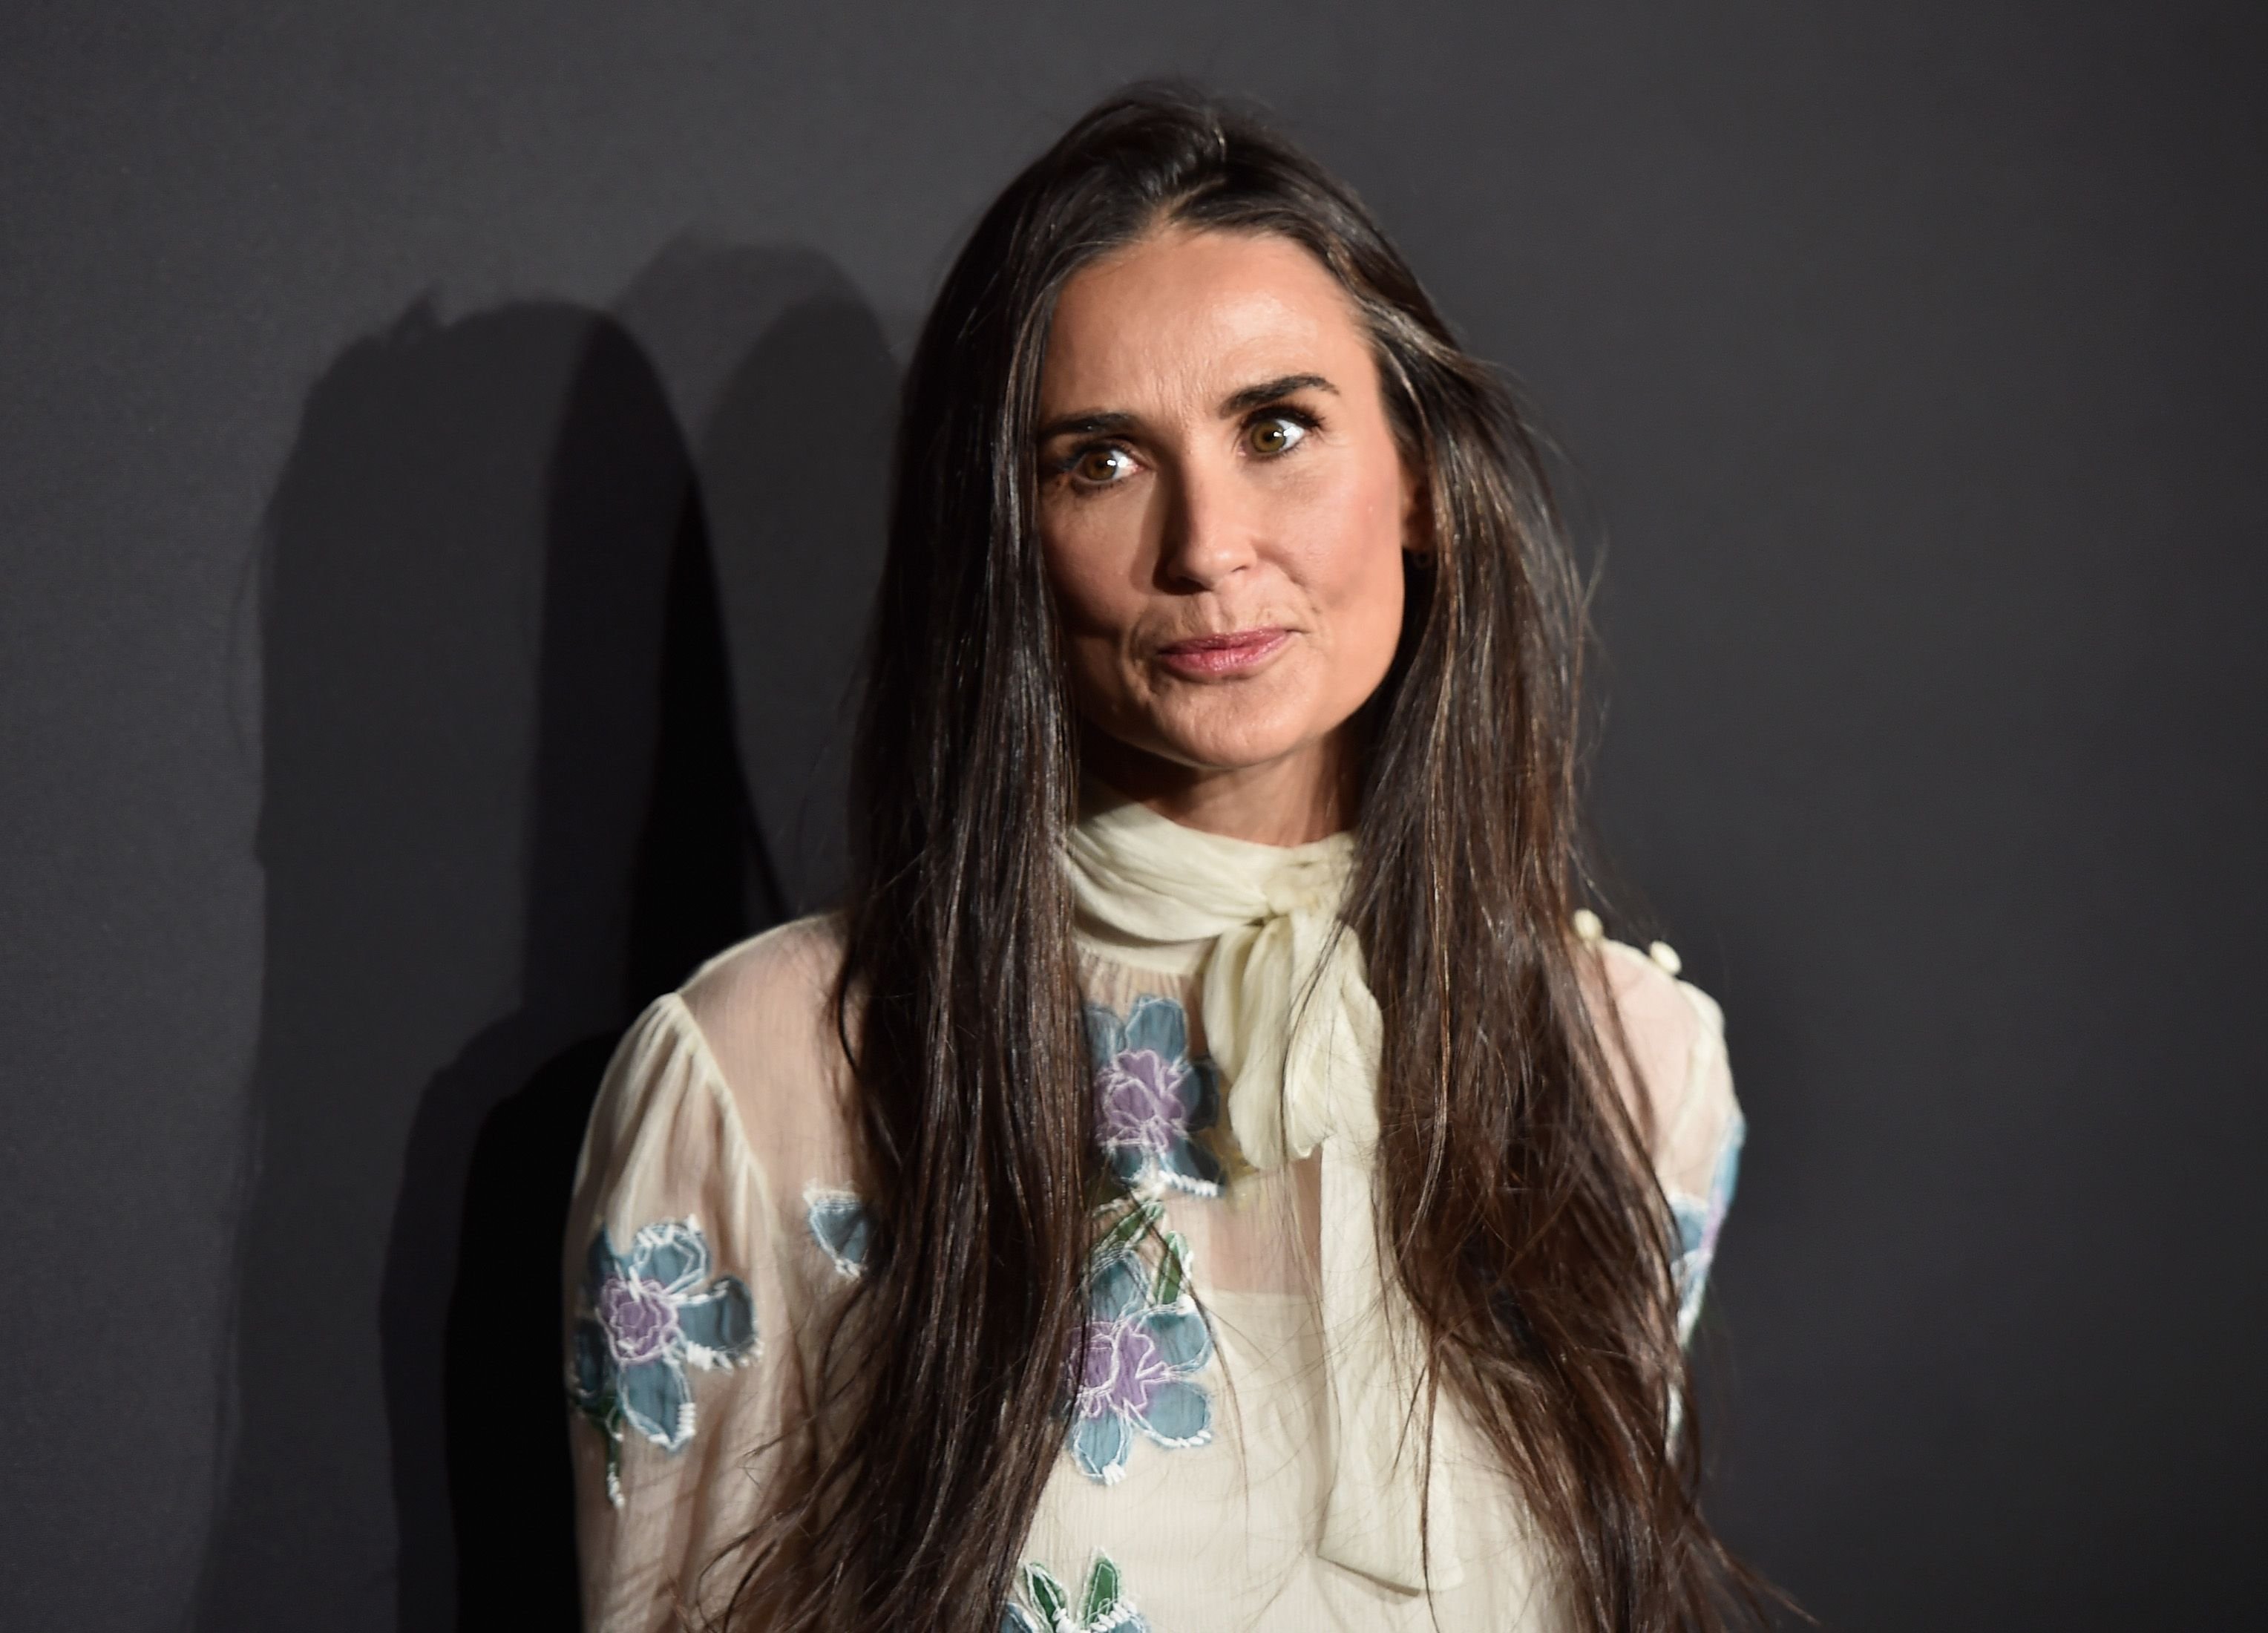 Actress Demi Moore at Prada Presents 'Past Forward' by David O. Russell premiere at Hauser Wirth & Schimmel on November 15, 2016 | Photo: Getty Images